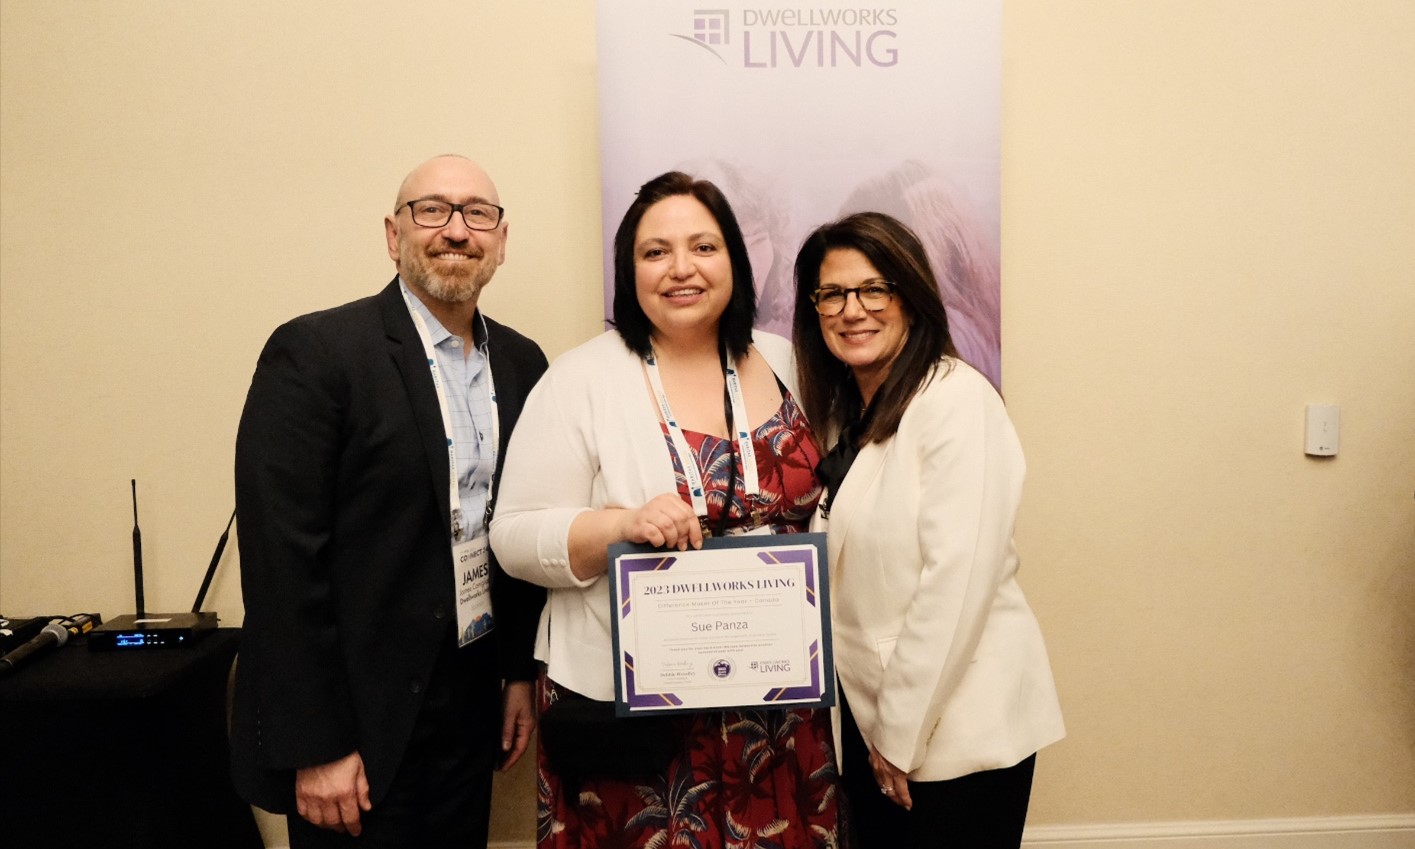 Sue Panza - Dwellworks Living Difference Maker of the Year